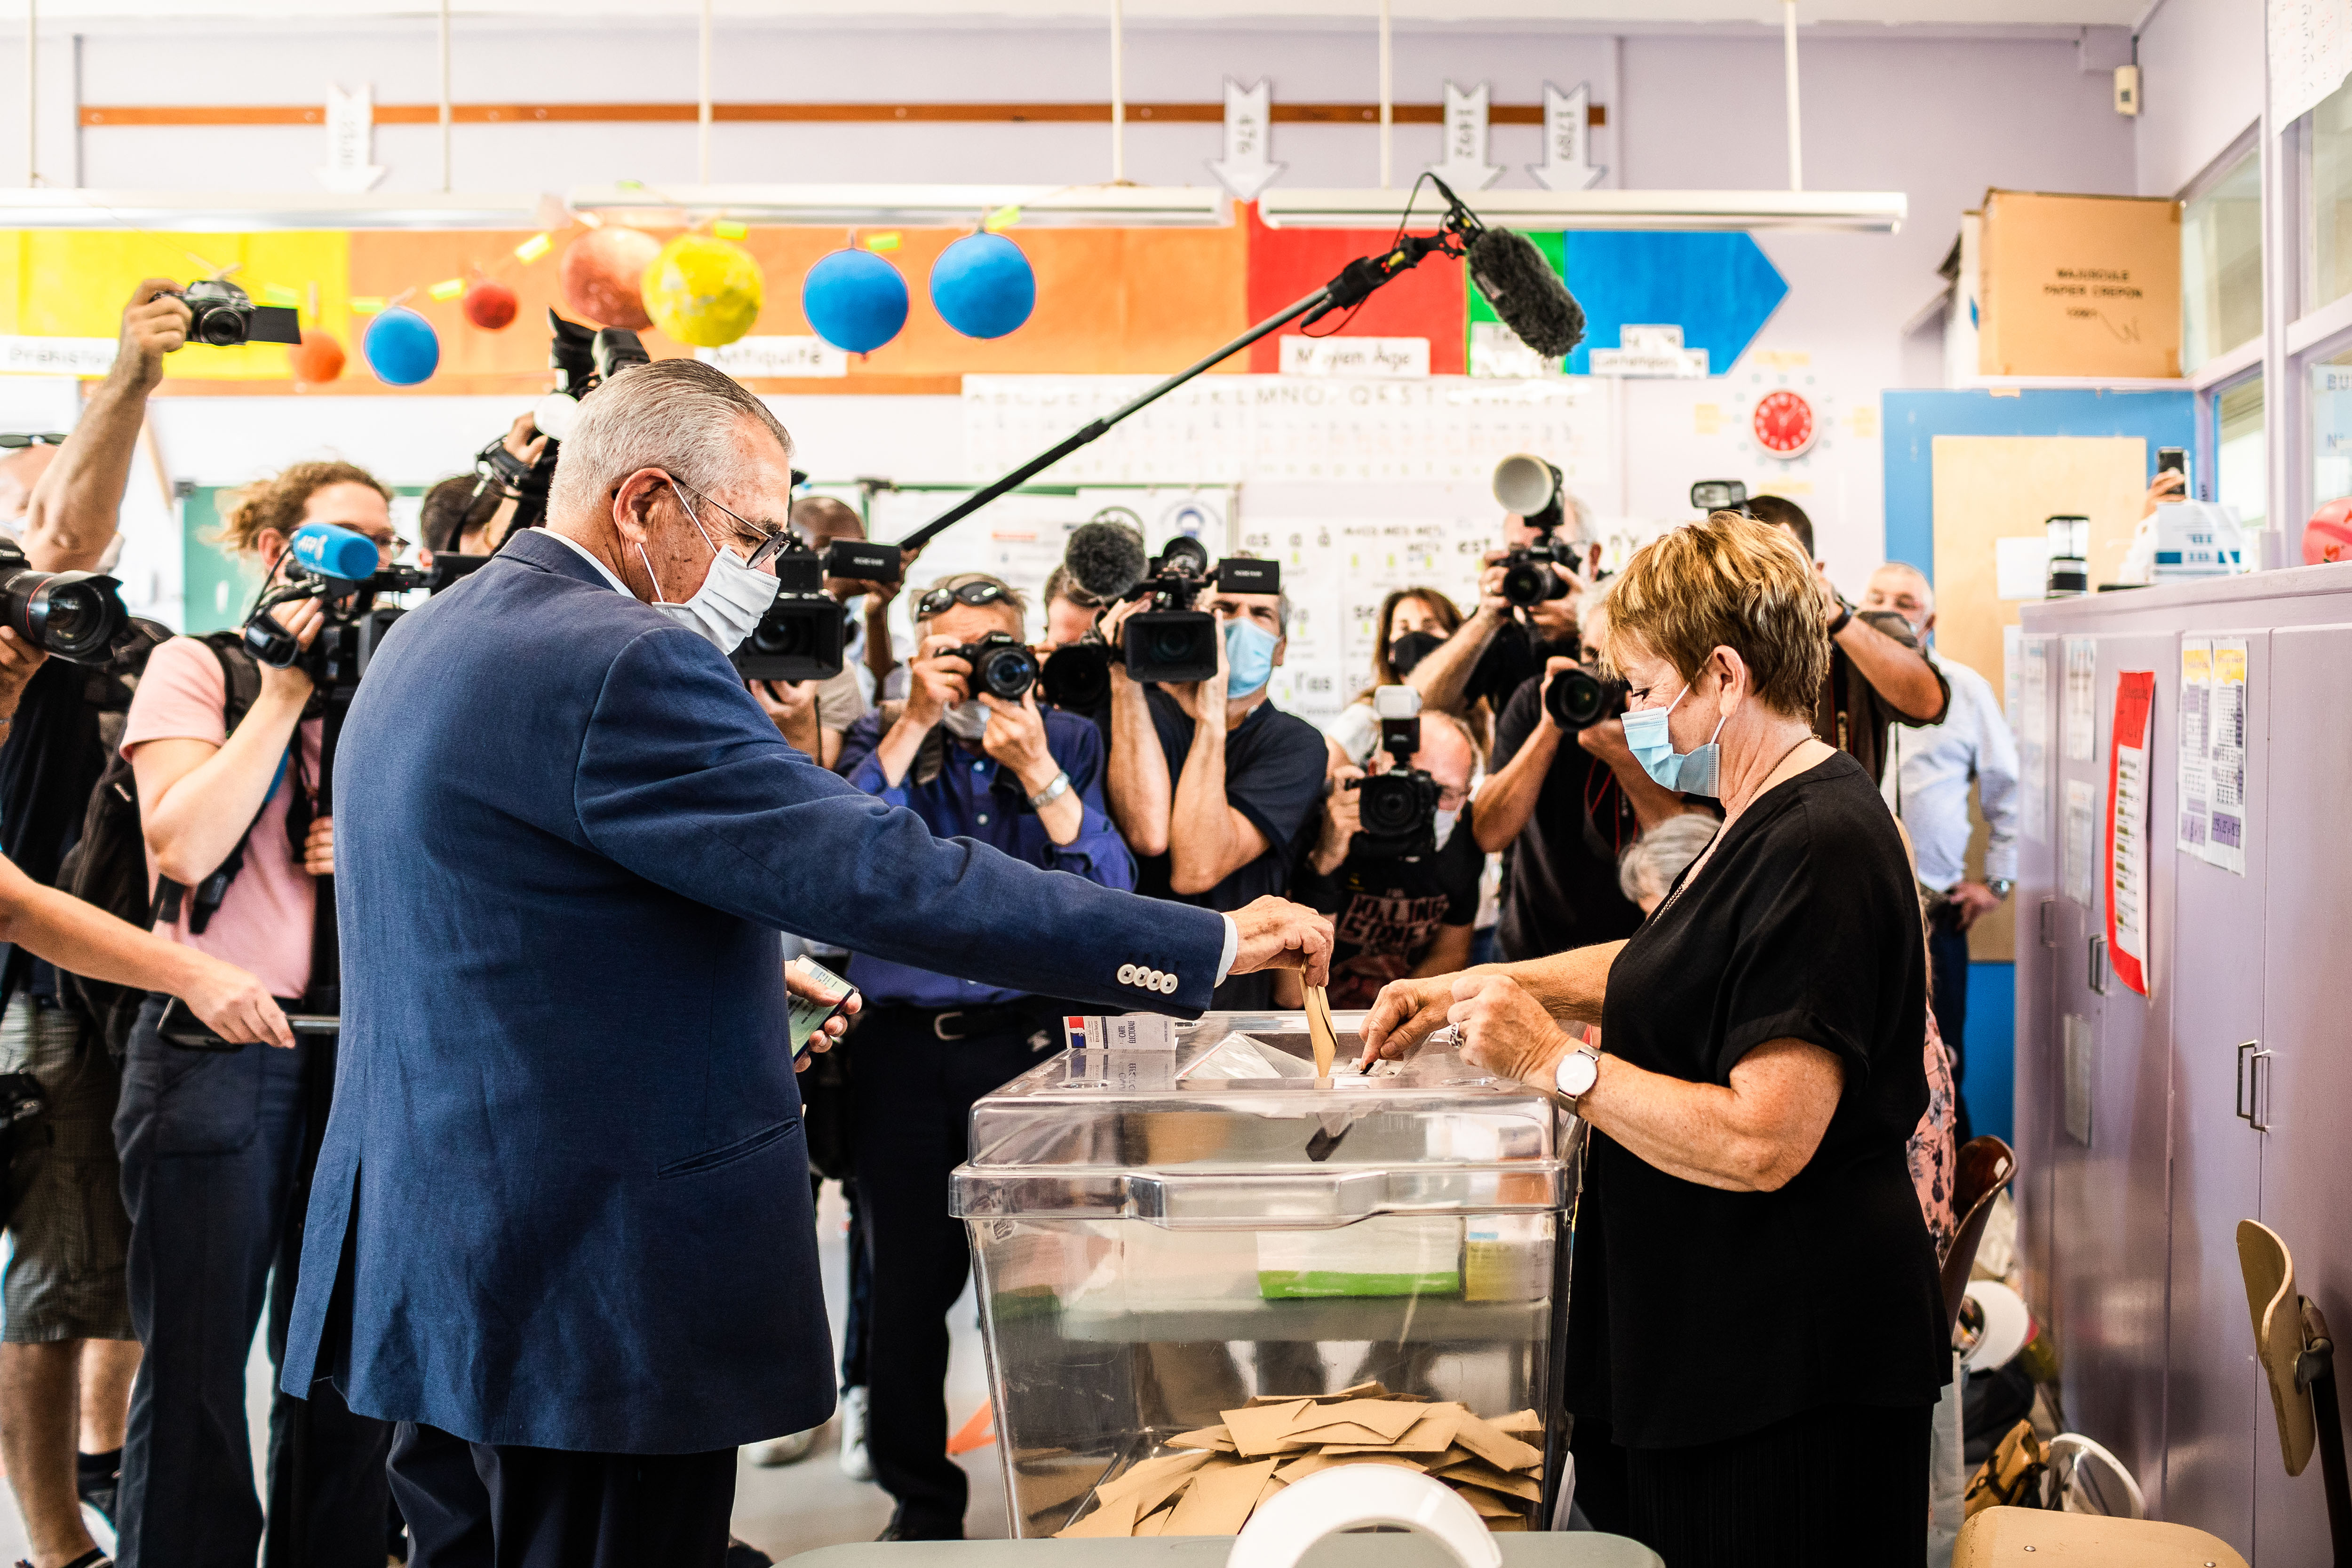 Perpignan, 28 June 2020, Election Municipales 2020, 2nd Tour. Election opposing Louis Aliot, Rassemblement National candidate and poll favourite, to Jean-Marc Pujol, outgoing mayor, Les Républicains and supported by a Republican Front.Vote of Jean-Marc Pujol, outgoing mayor and in unfavorable ballooning according to the current polls.Perpignan, 28 juin 2020, Election Municipales 2020, 2nd Tour. Election opposant Louis Aliot, candidat Rassemblement National et favori des sondages à Jean-Marc Pujol, maire sortant, Les Républicains et soutenu par un Front Républicain.Vote de Jean-Marc Pujol, maire sortant et en ballotage défavorable selon les sondages en cours.NO USE FRANCE